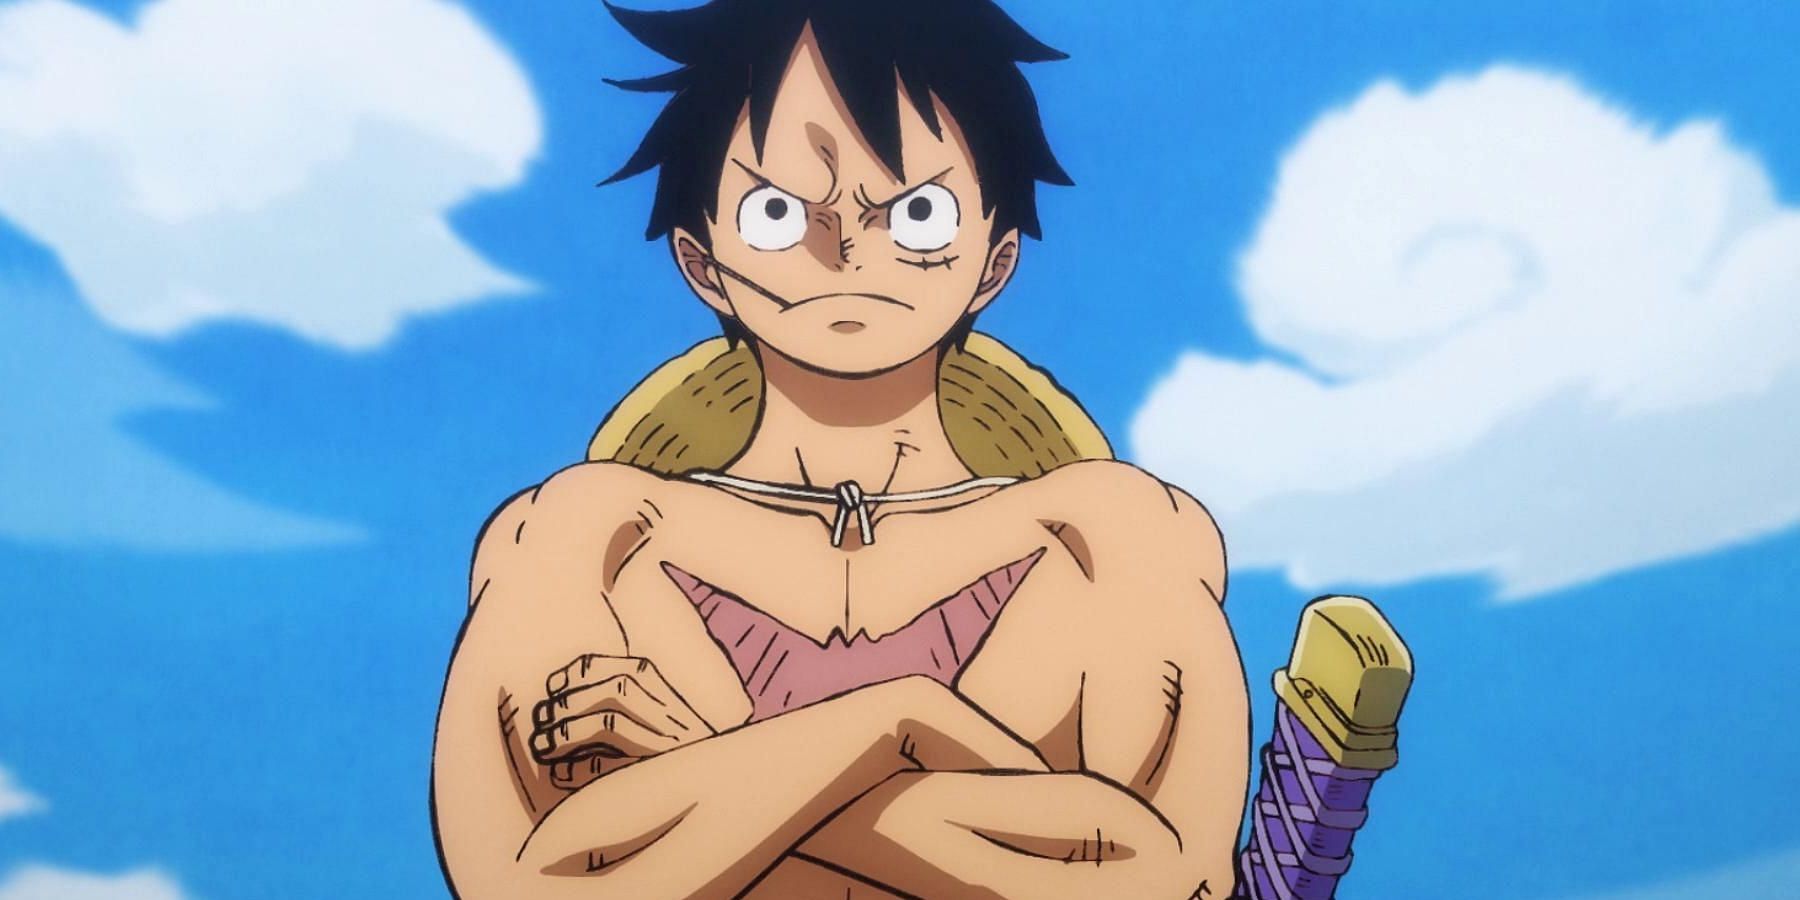 monkey-d-luffy-from-one-piece